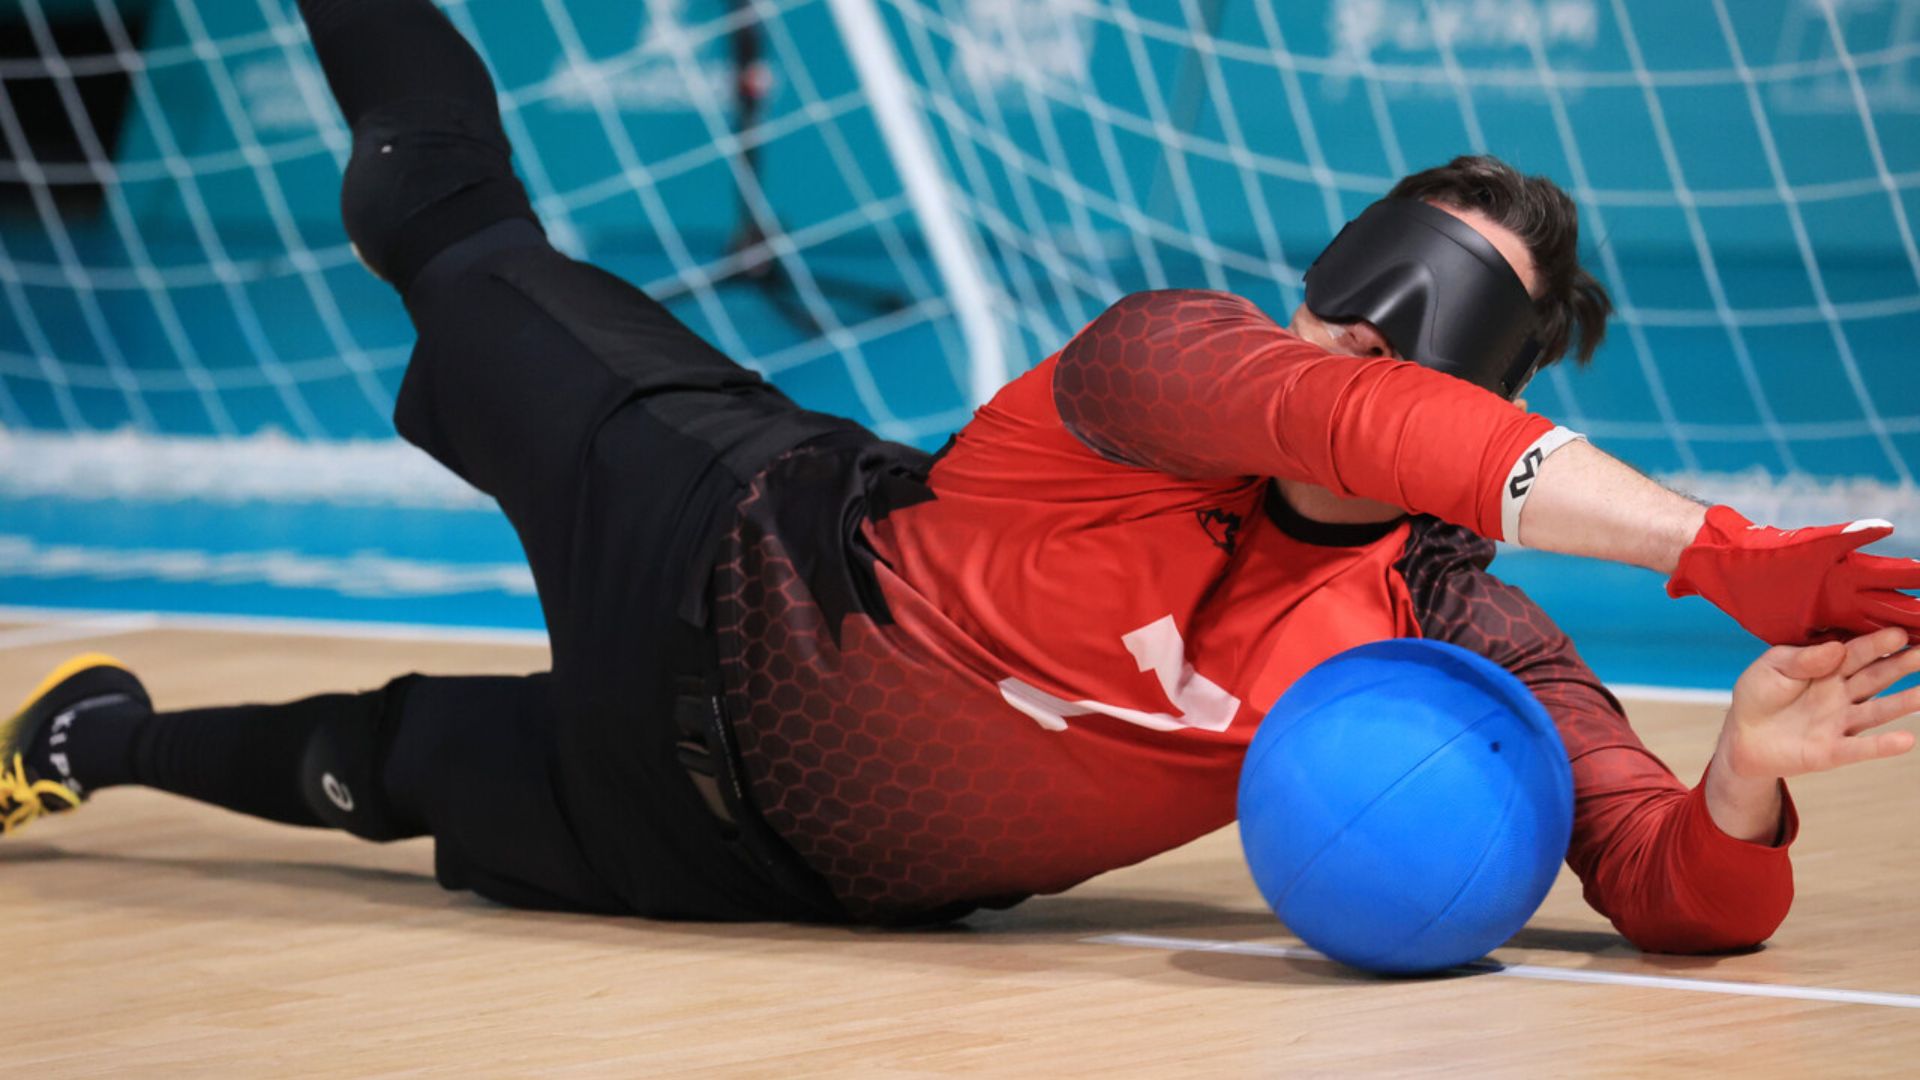 Goalball: Canadian Male Team Secures Their First Victory